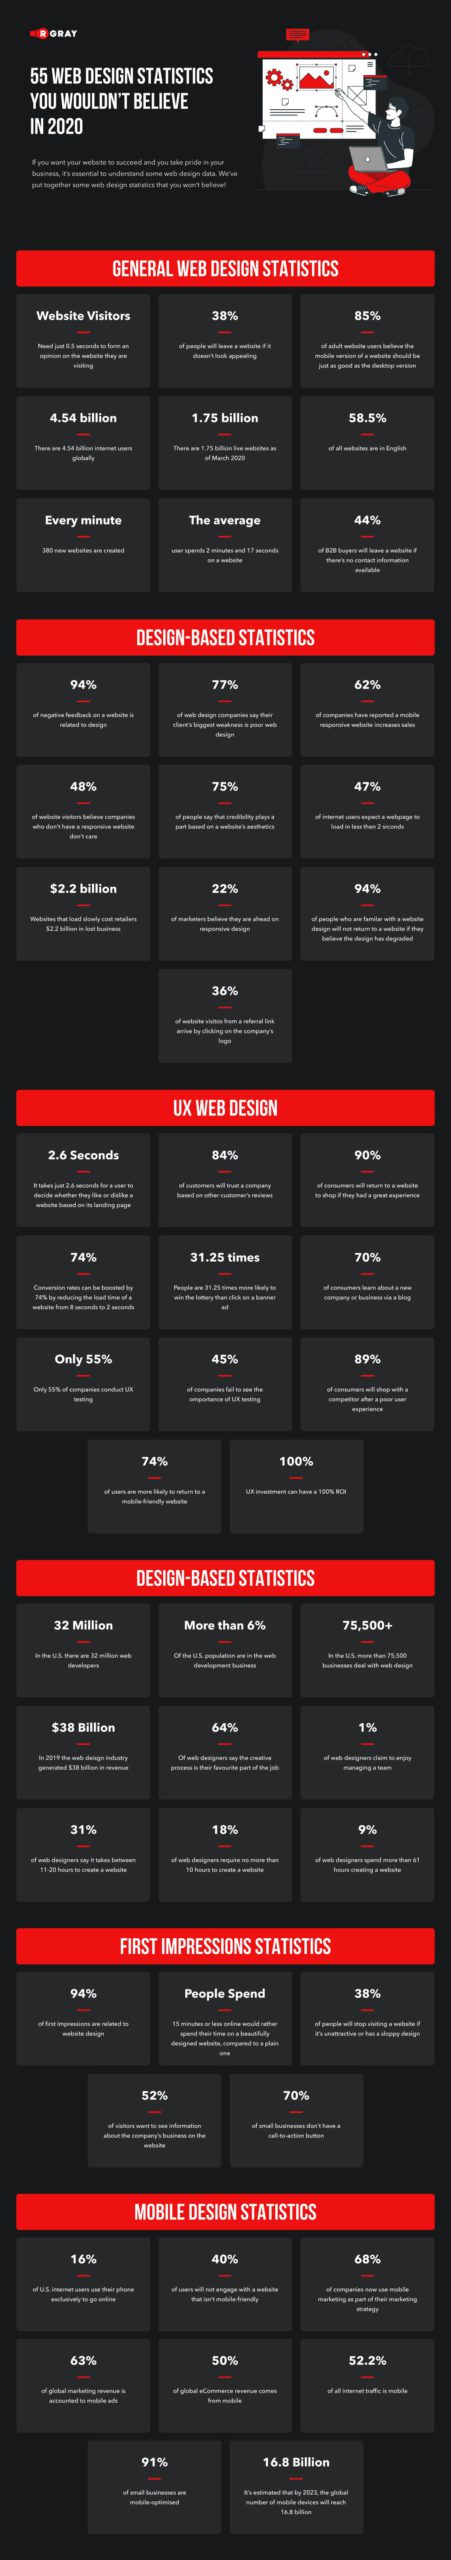 55 Essential Web Design Stats to Guide Your Online Strategy in 2020 and Beyond 